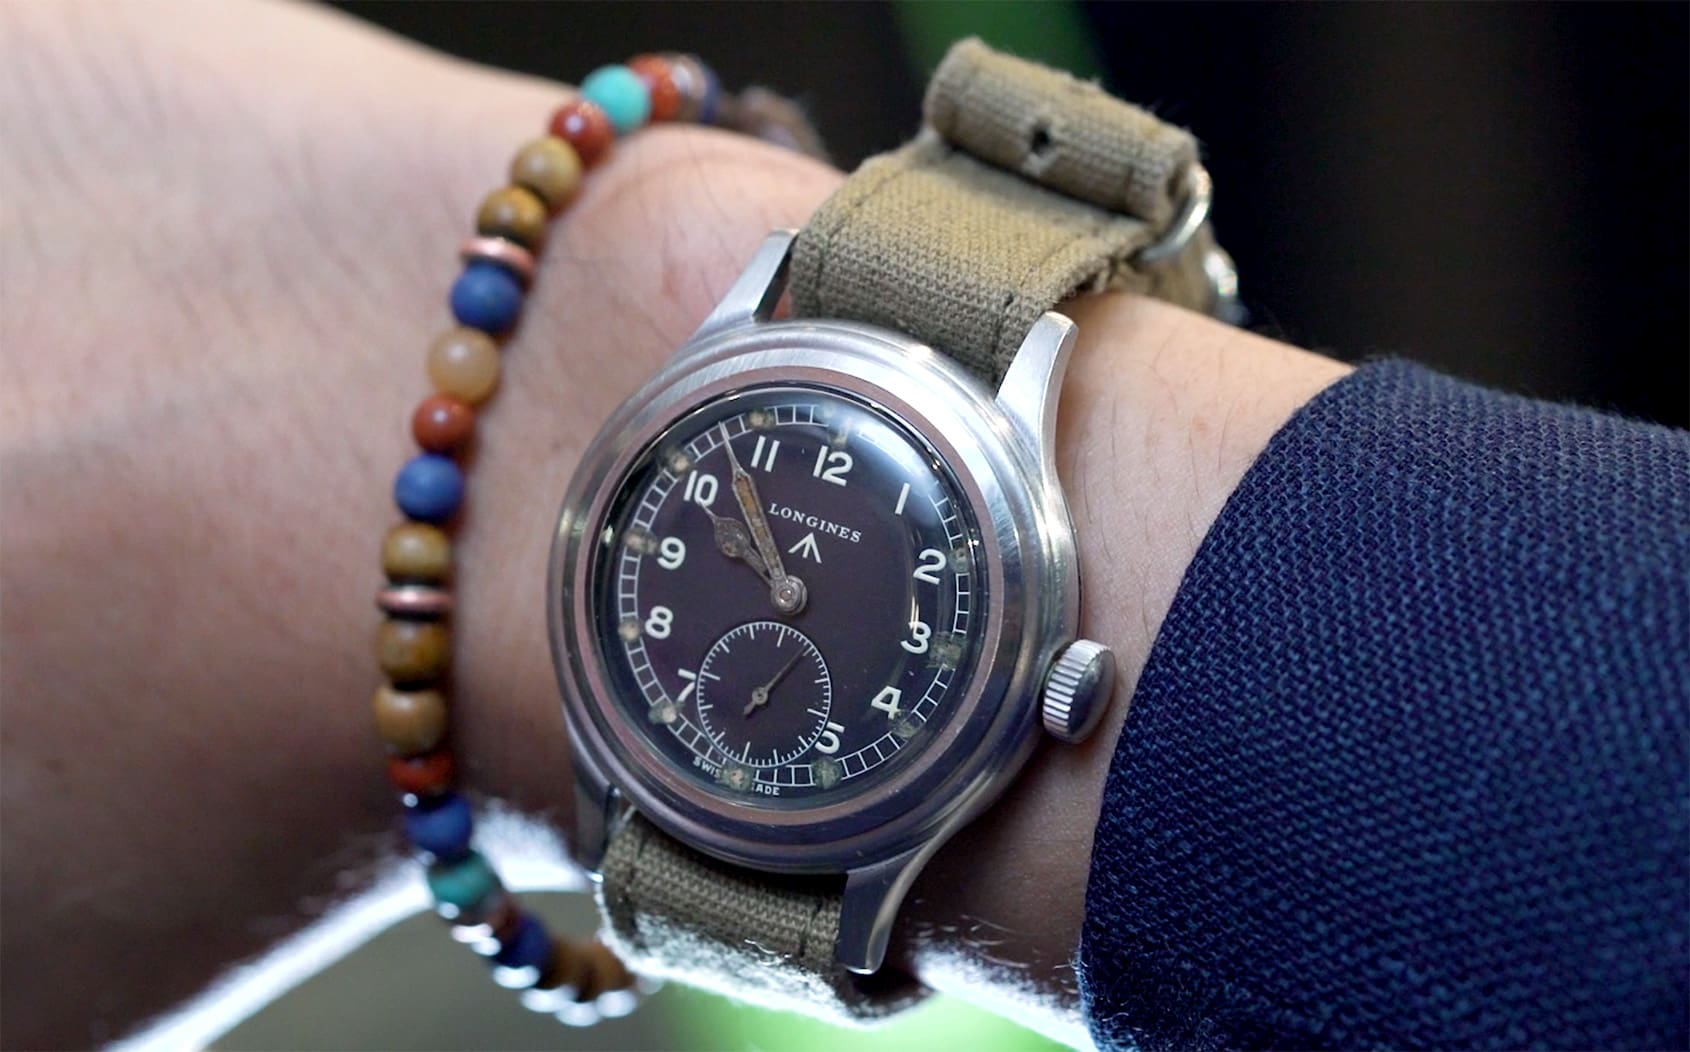 VIDEO: “I use it as my daily beater” – Andre and his Longines Greenlander